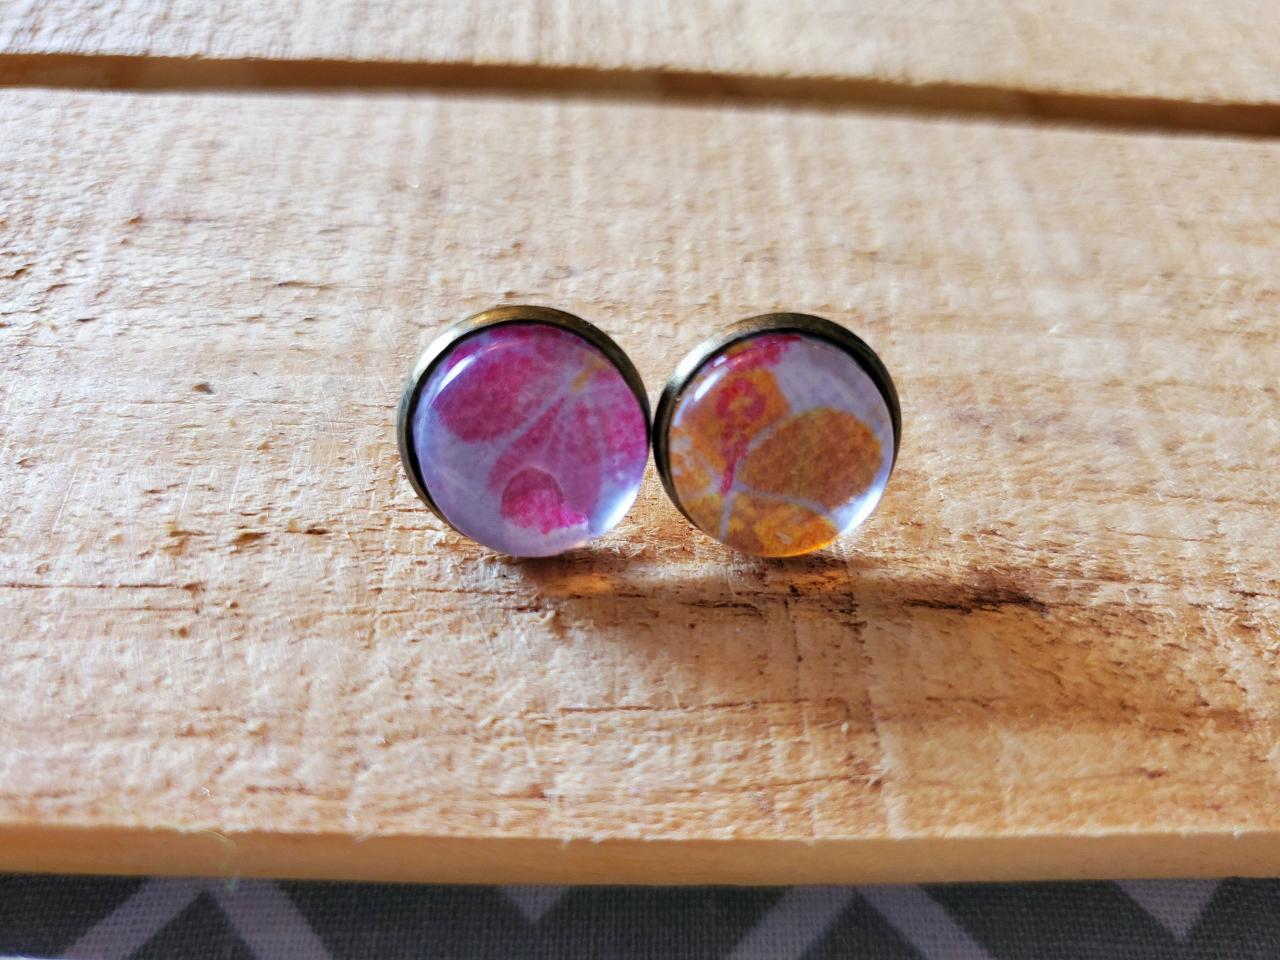 Hibiscus Leather Stud Earrings, Floral Post Earrings, Dainty Earrings, Stud Leather Earrings, Boho Earrings, Statement Jewelry, Lightweight